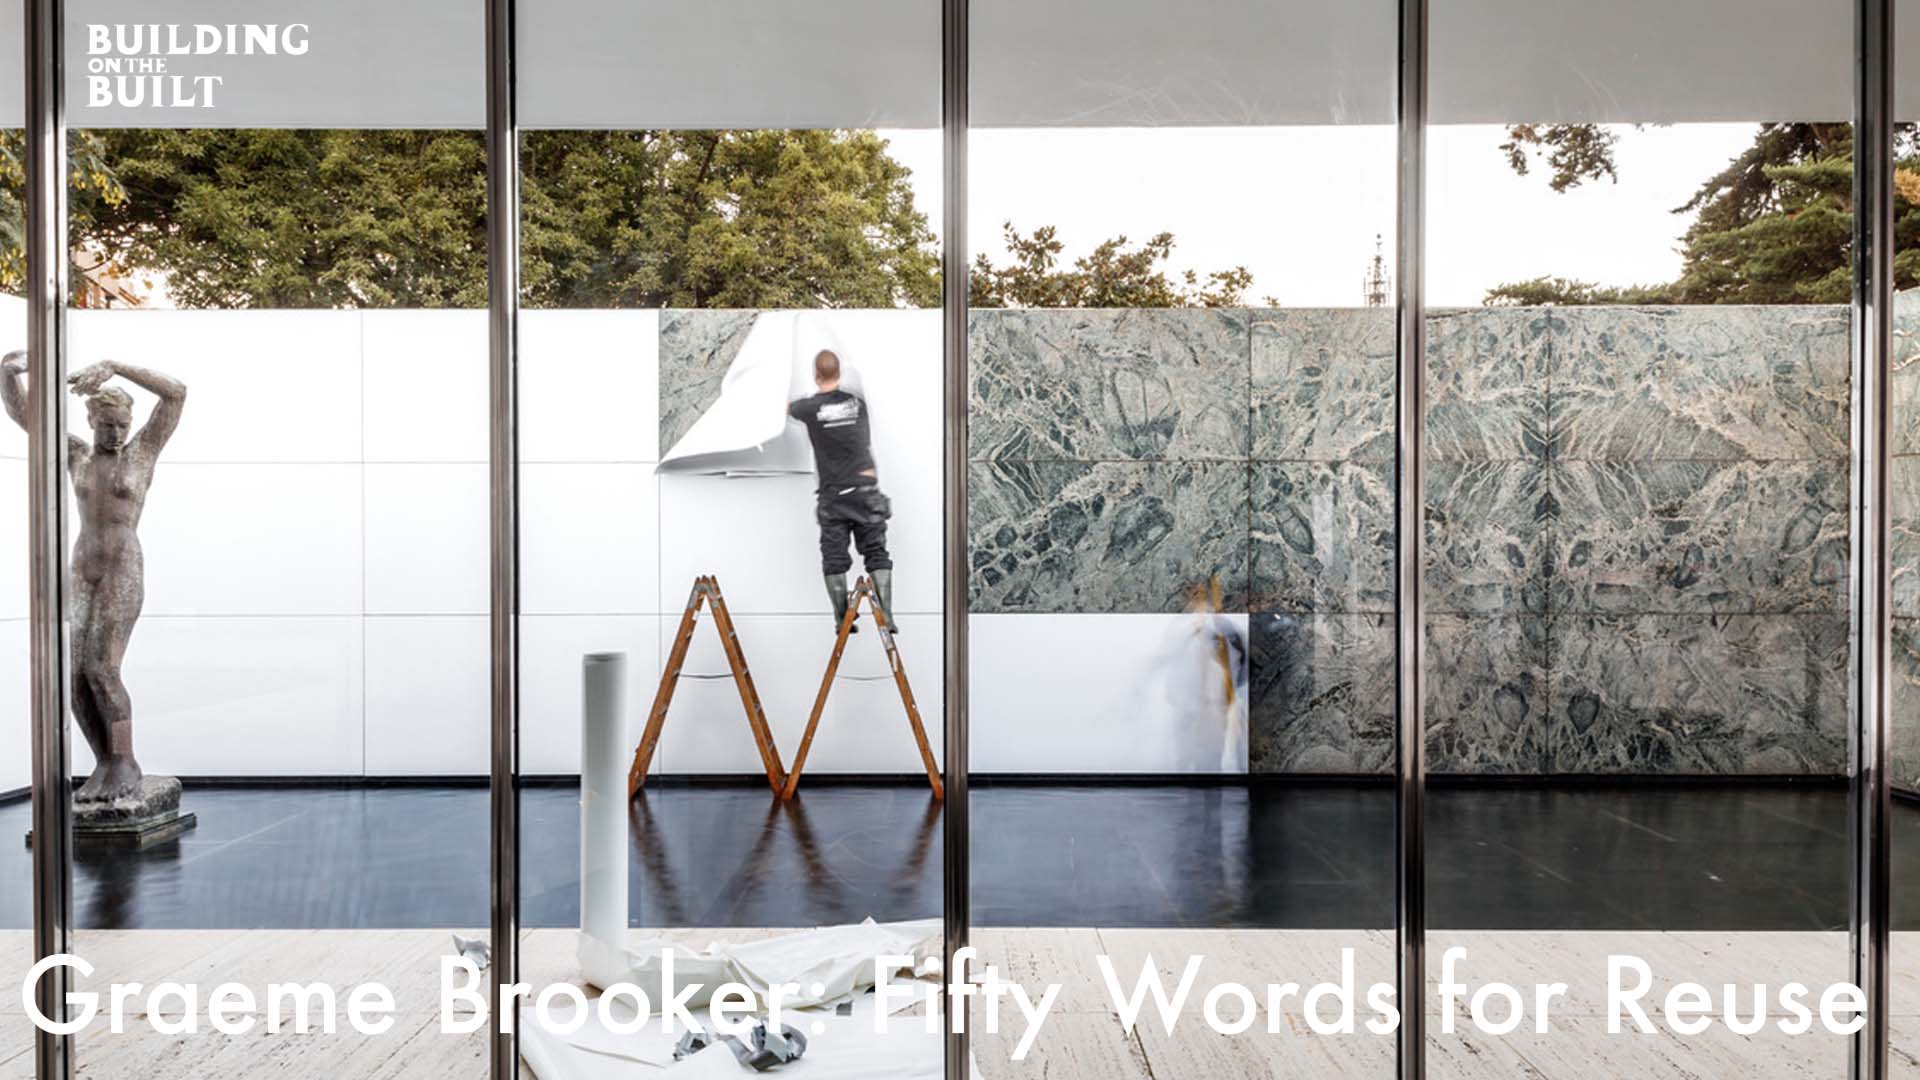 Building on the Built: Graeme Brooker – Fifty Words for Reuse